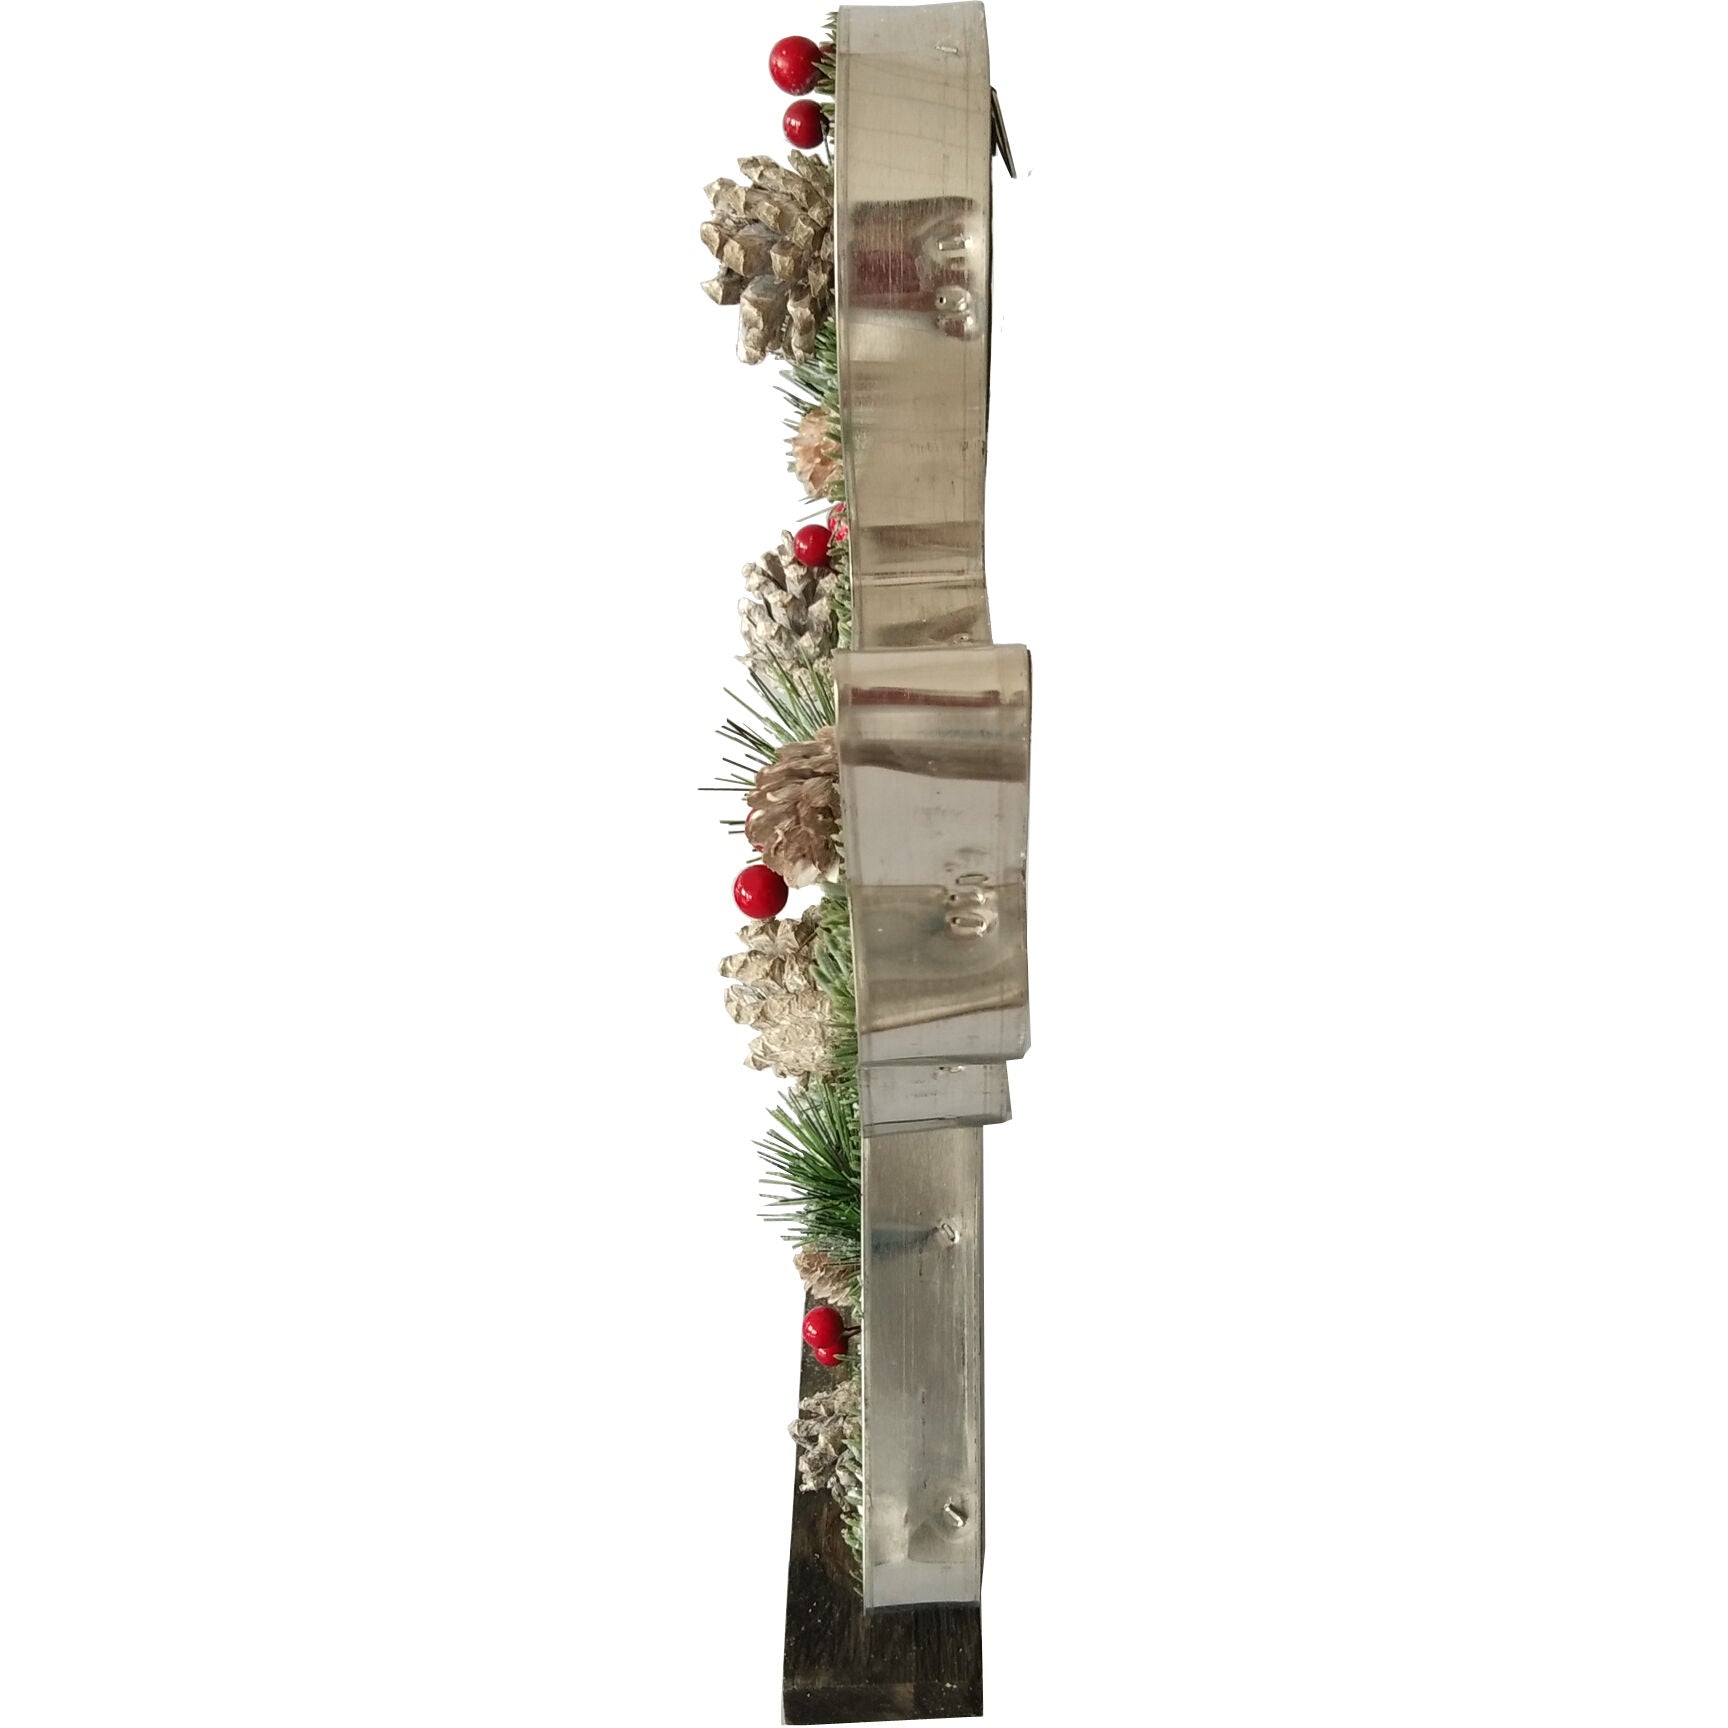 Fraser Hill Farm -  15-In. Tall Angel-Shaped Metal Frame with Pinecones and Berries, Festive Indoor Christmas Decoration